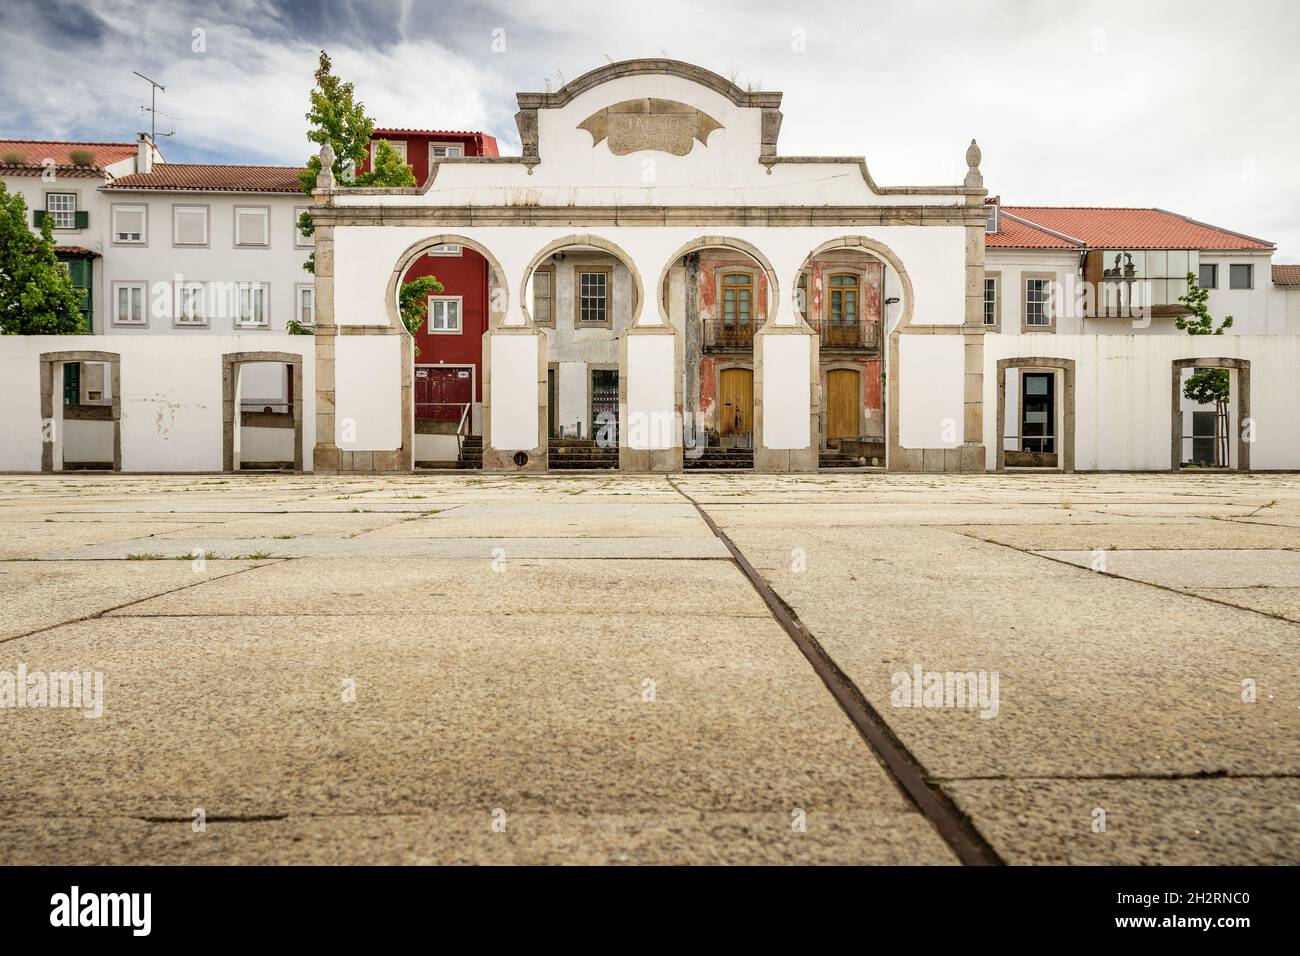 View of the ruins of the facade of the old market in the Camões Square in Bragança, Portugal. Stock Photo